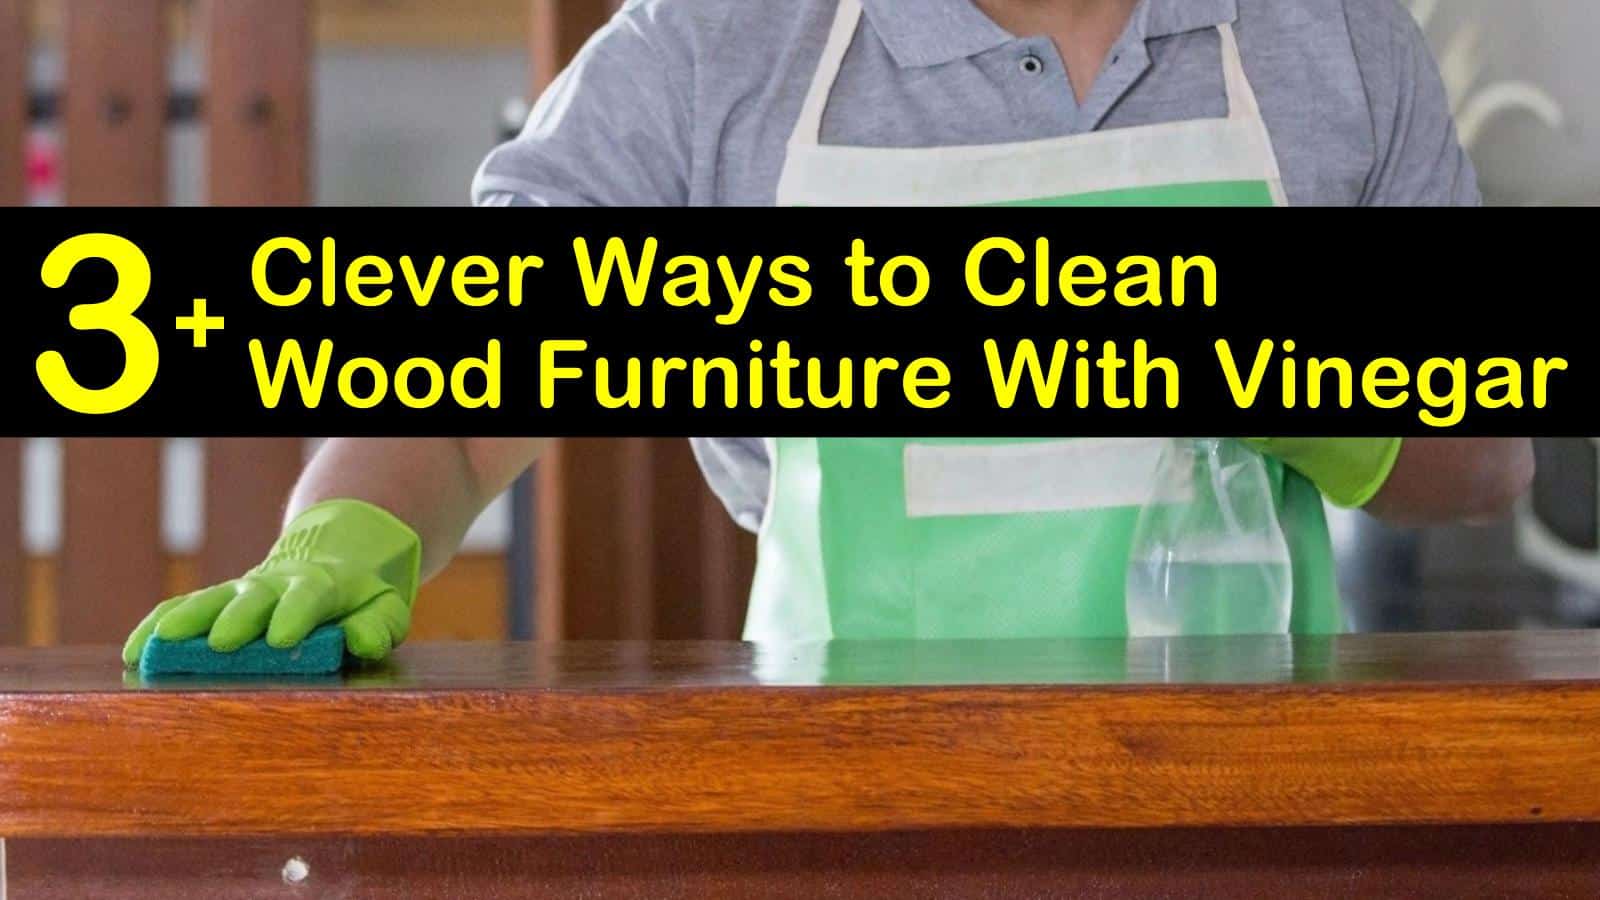 20+ Clever Ways to Clean Wood Furniture With Vinegar